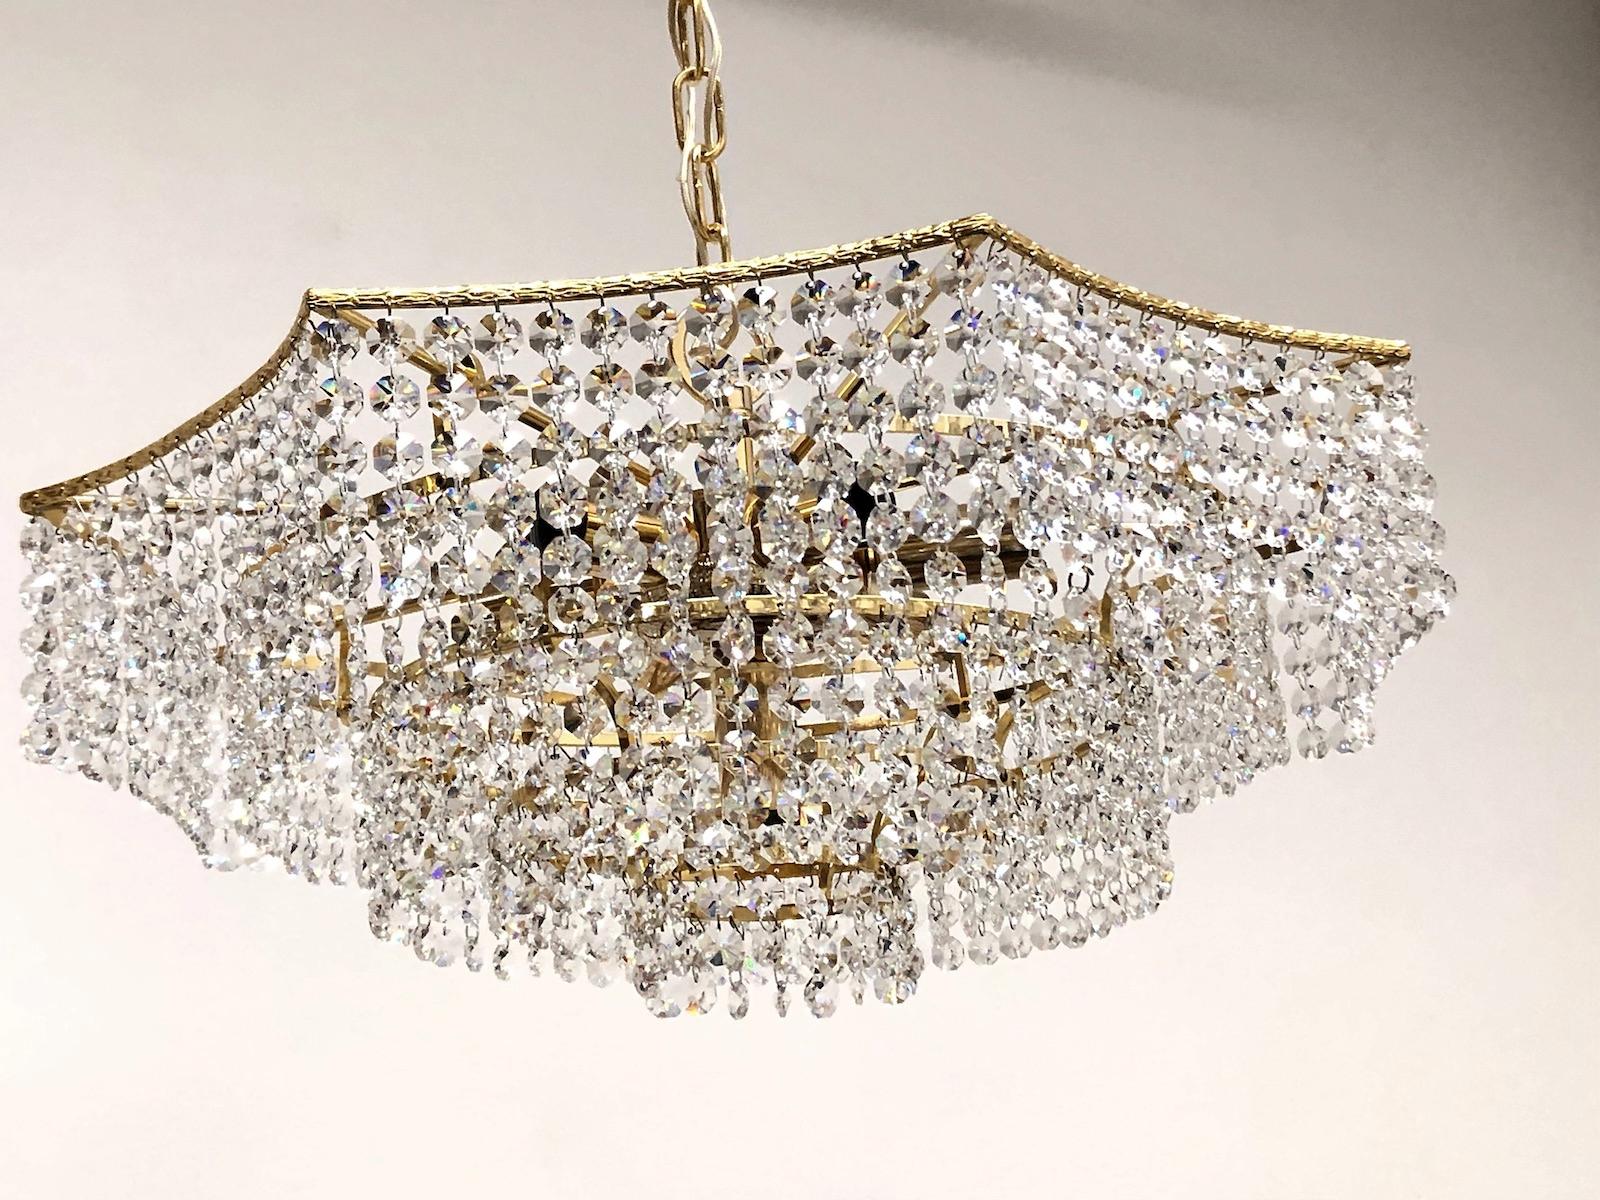 Brass and Crystal Glass Waterfall Chandelier, Richard Essig, Germany, 1960s In Good Condition For Sale In Nuernberg, DE